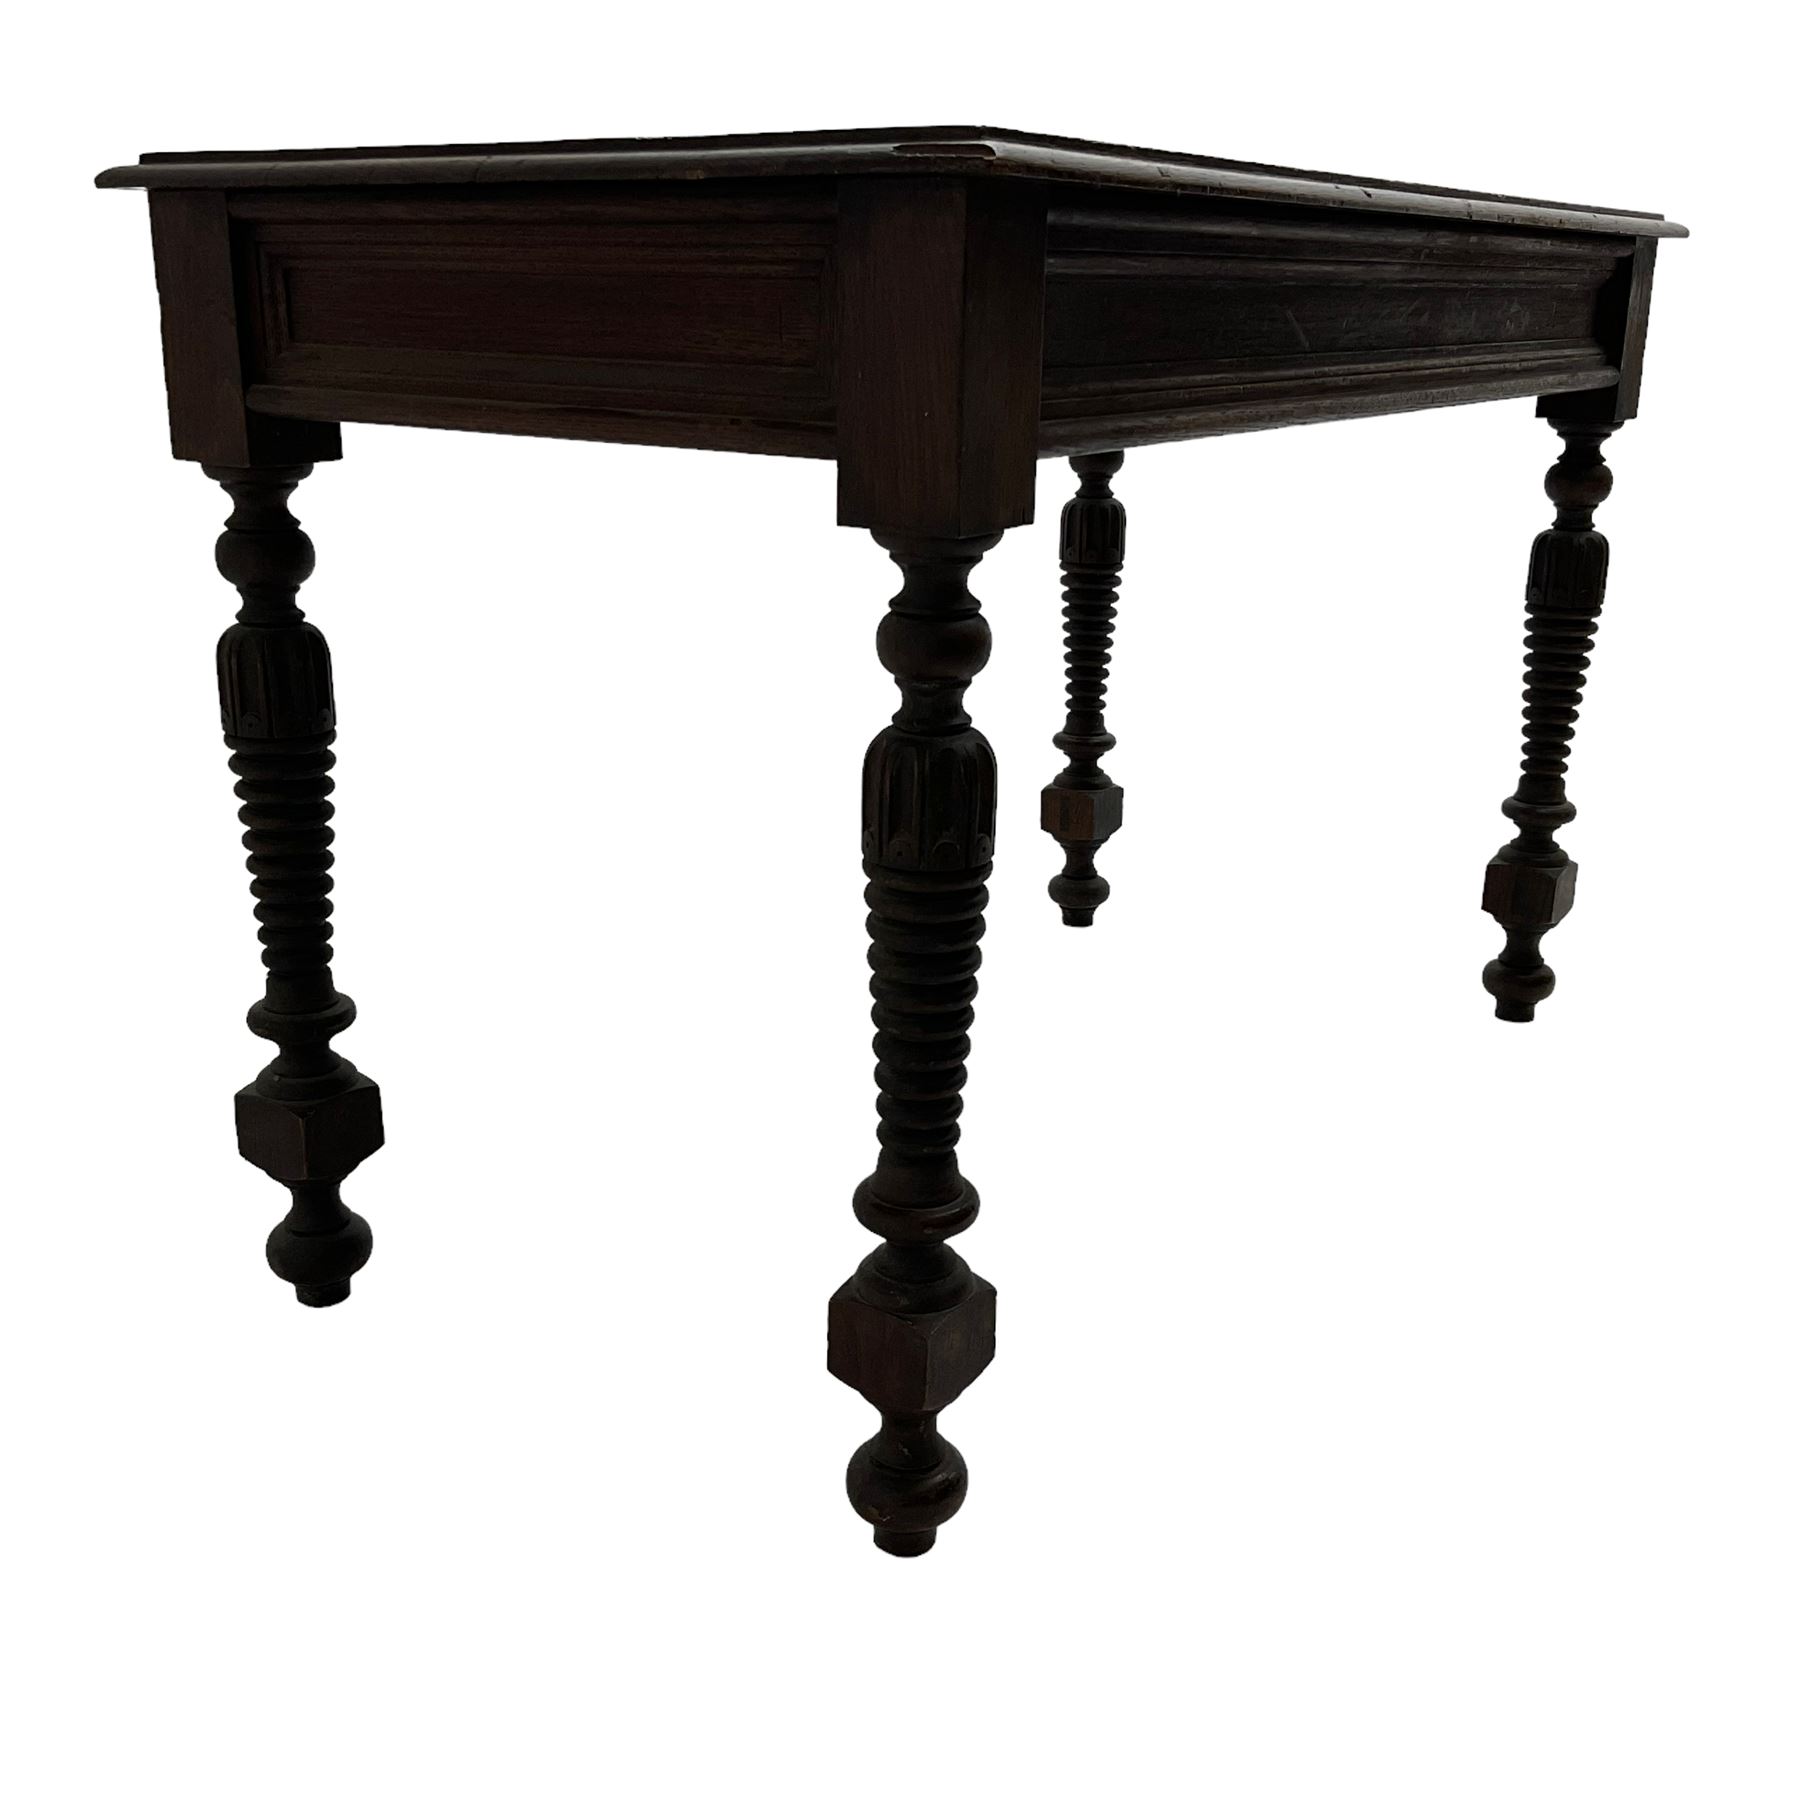 Late 19th century oak side table - Image 3 of 5